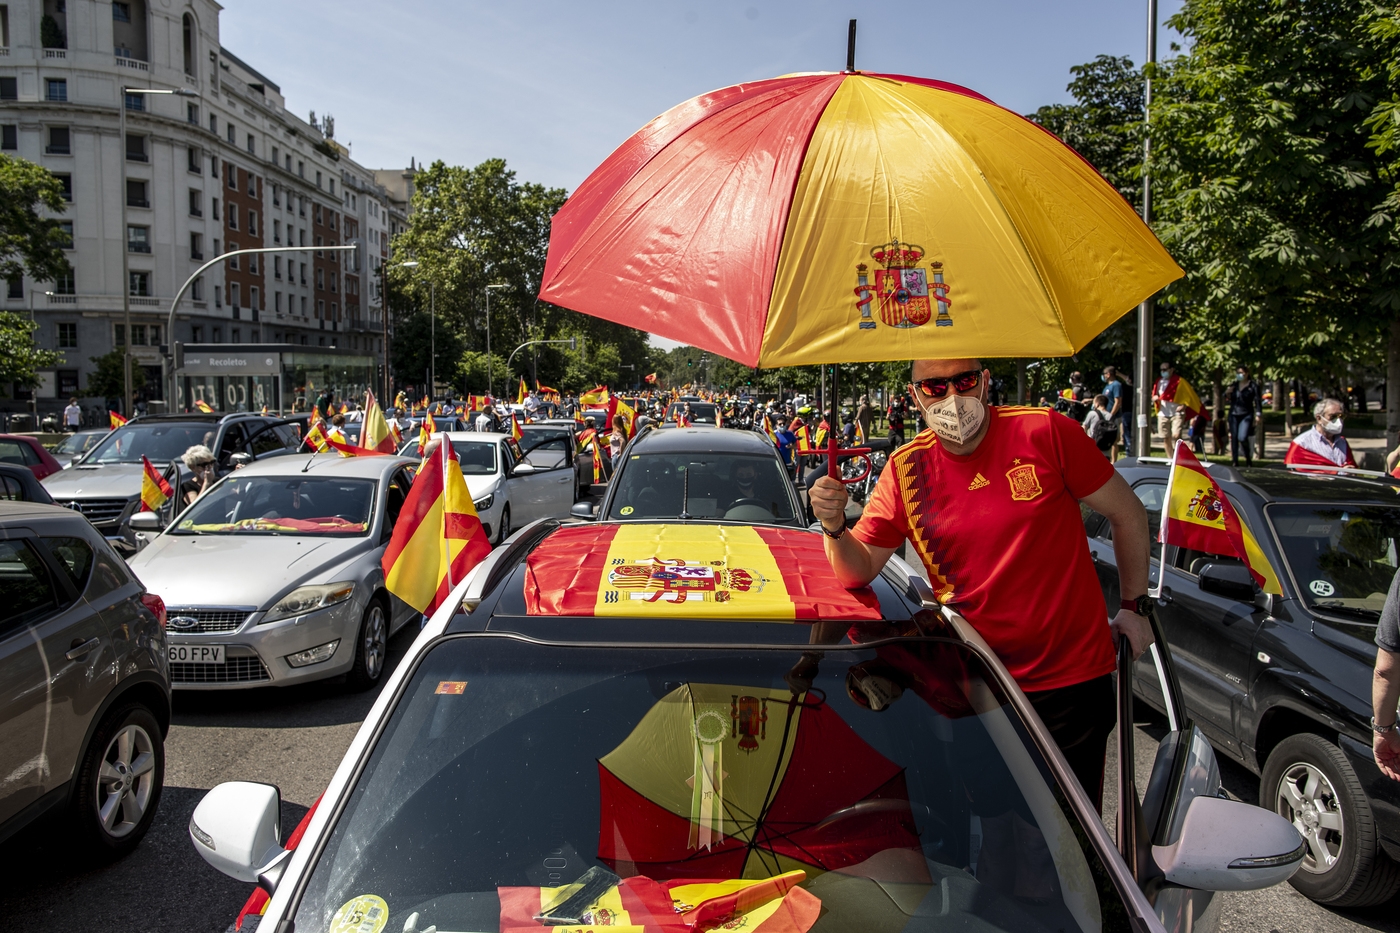 People wave Spanish flags during a drive-in protest organised by Spain's far-right Vox party against the Spanish government's handling of the nation's coronavirus outbreak in Madrid, Spain Saturday, May 23, 2020. (AP Photo/Manu Fernandez)